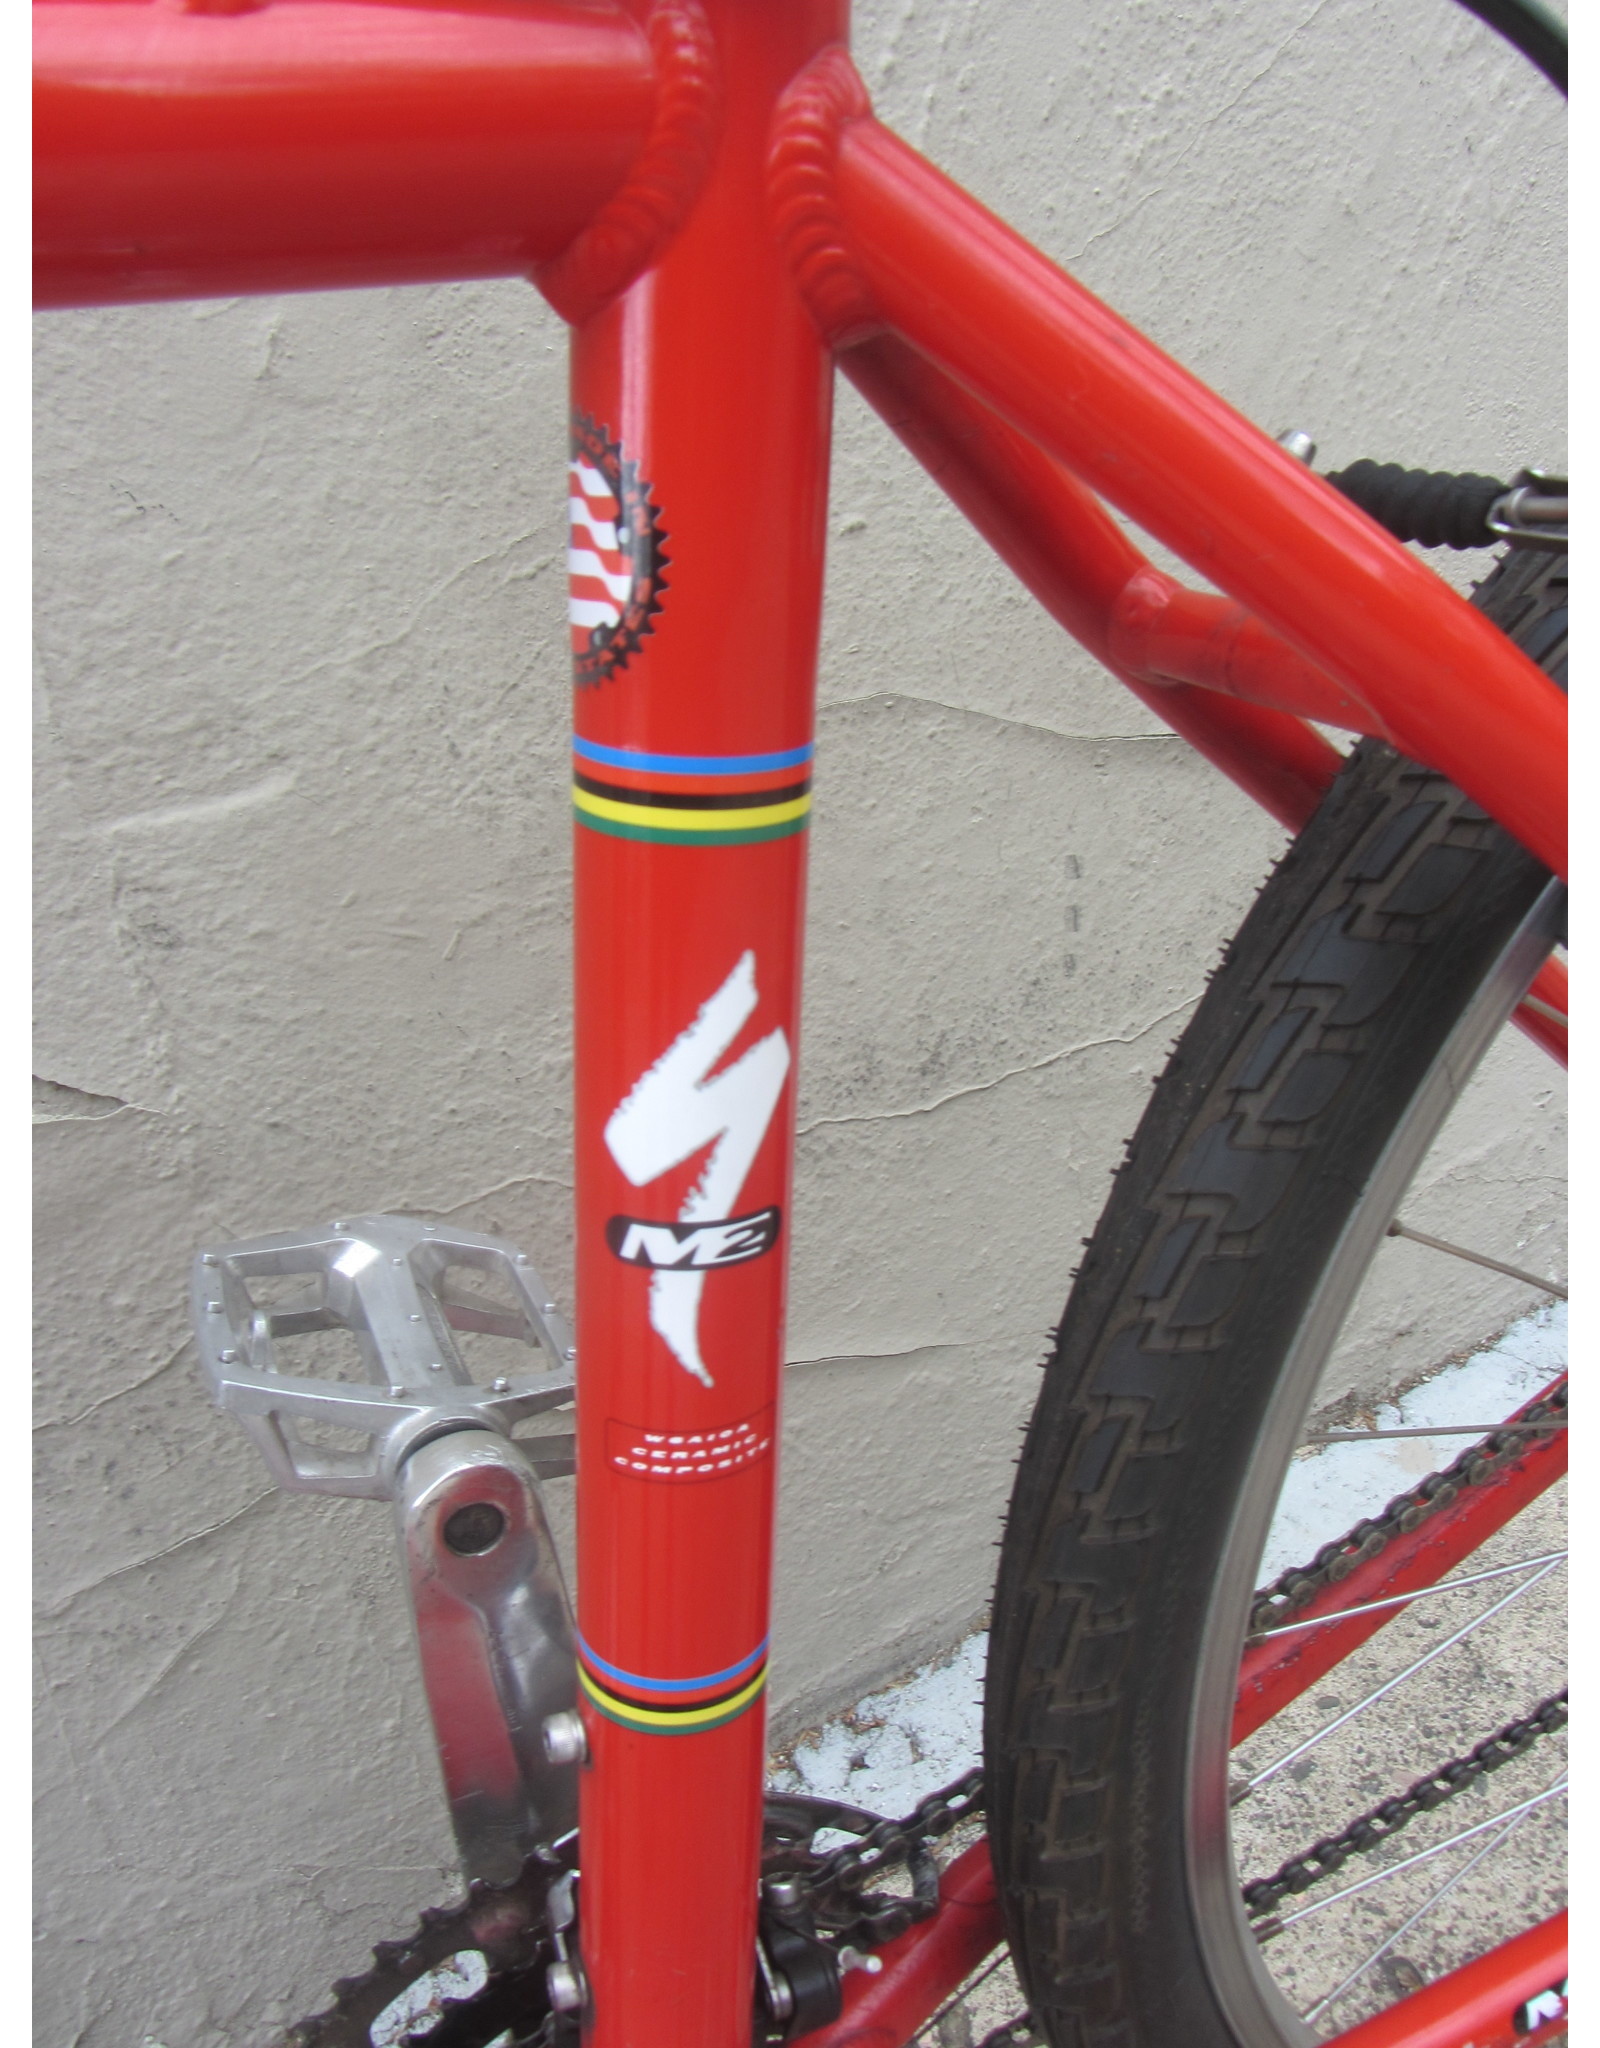 Specialized Specialized Stumpjumper Vintage,  1998, 19 Inches, Red